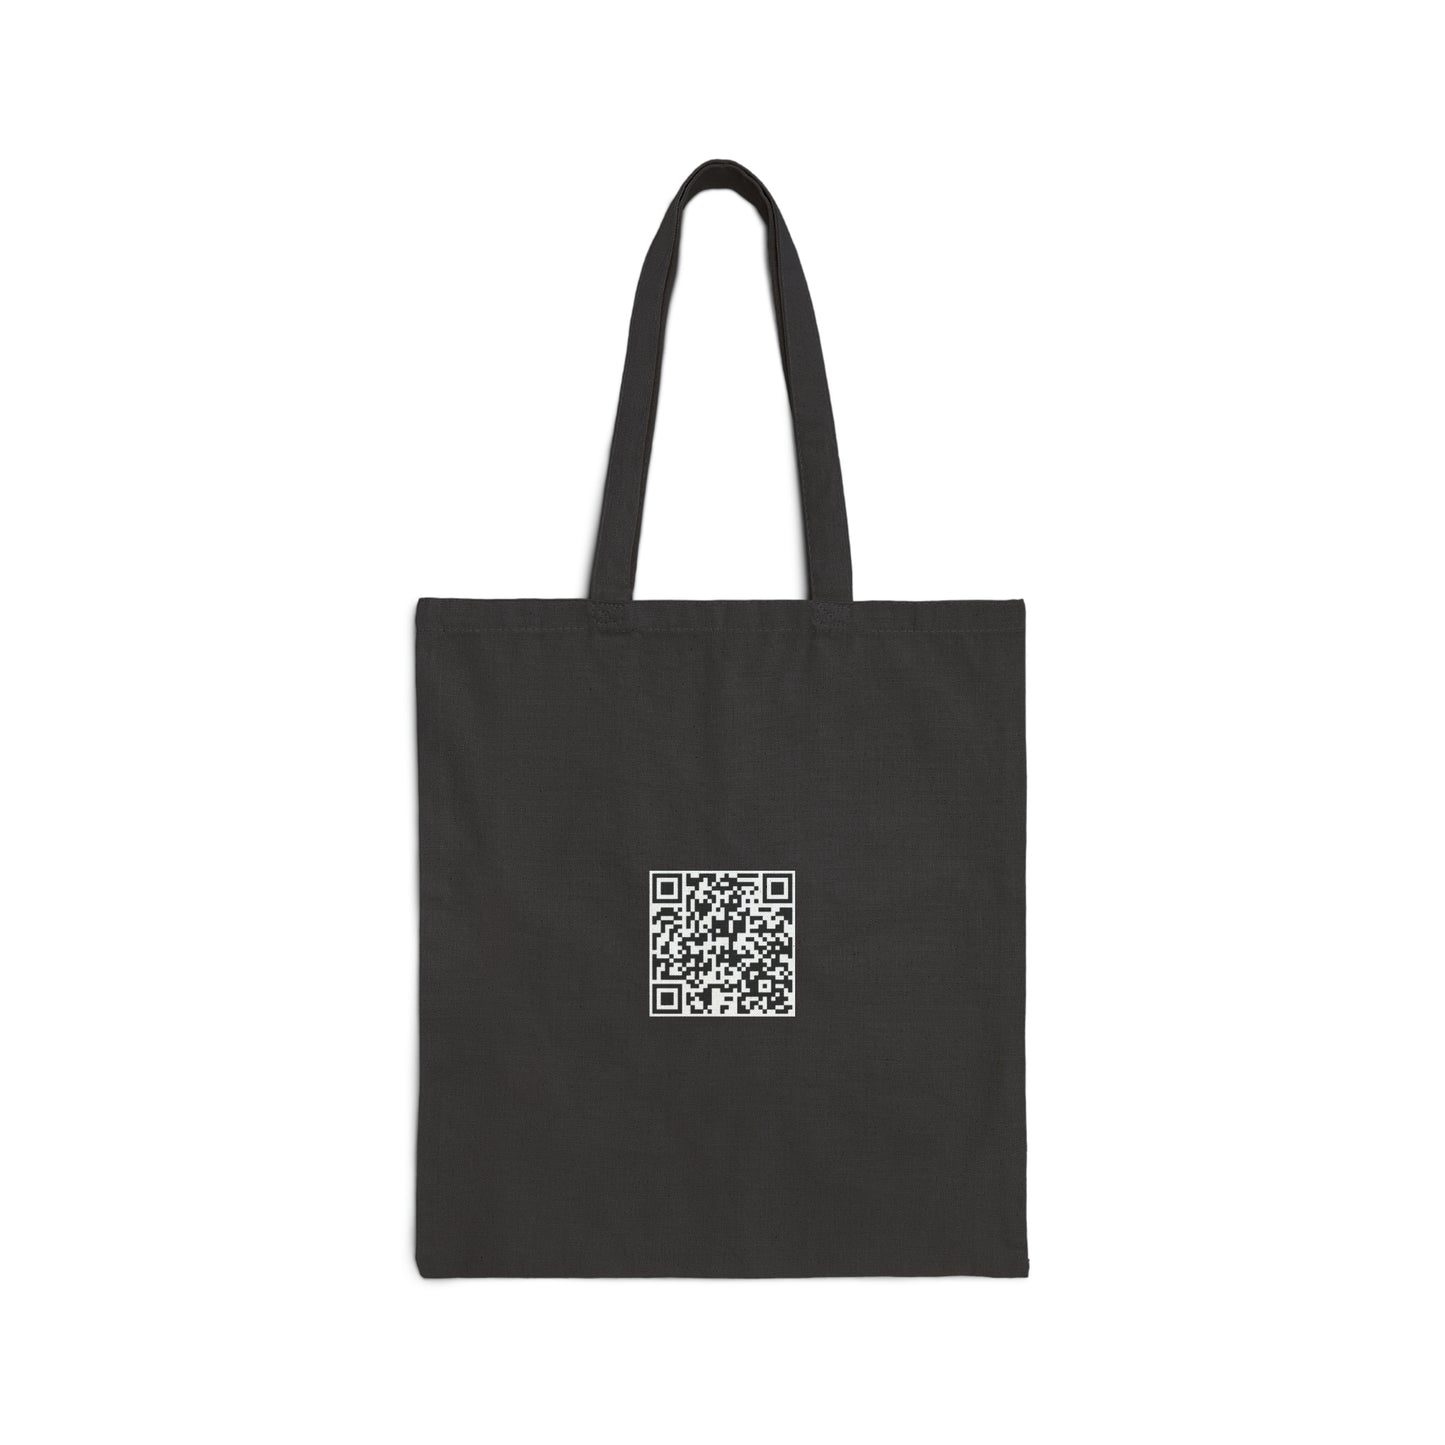 The Stones of Earth and Air - Cotton Canvas Tote Bag